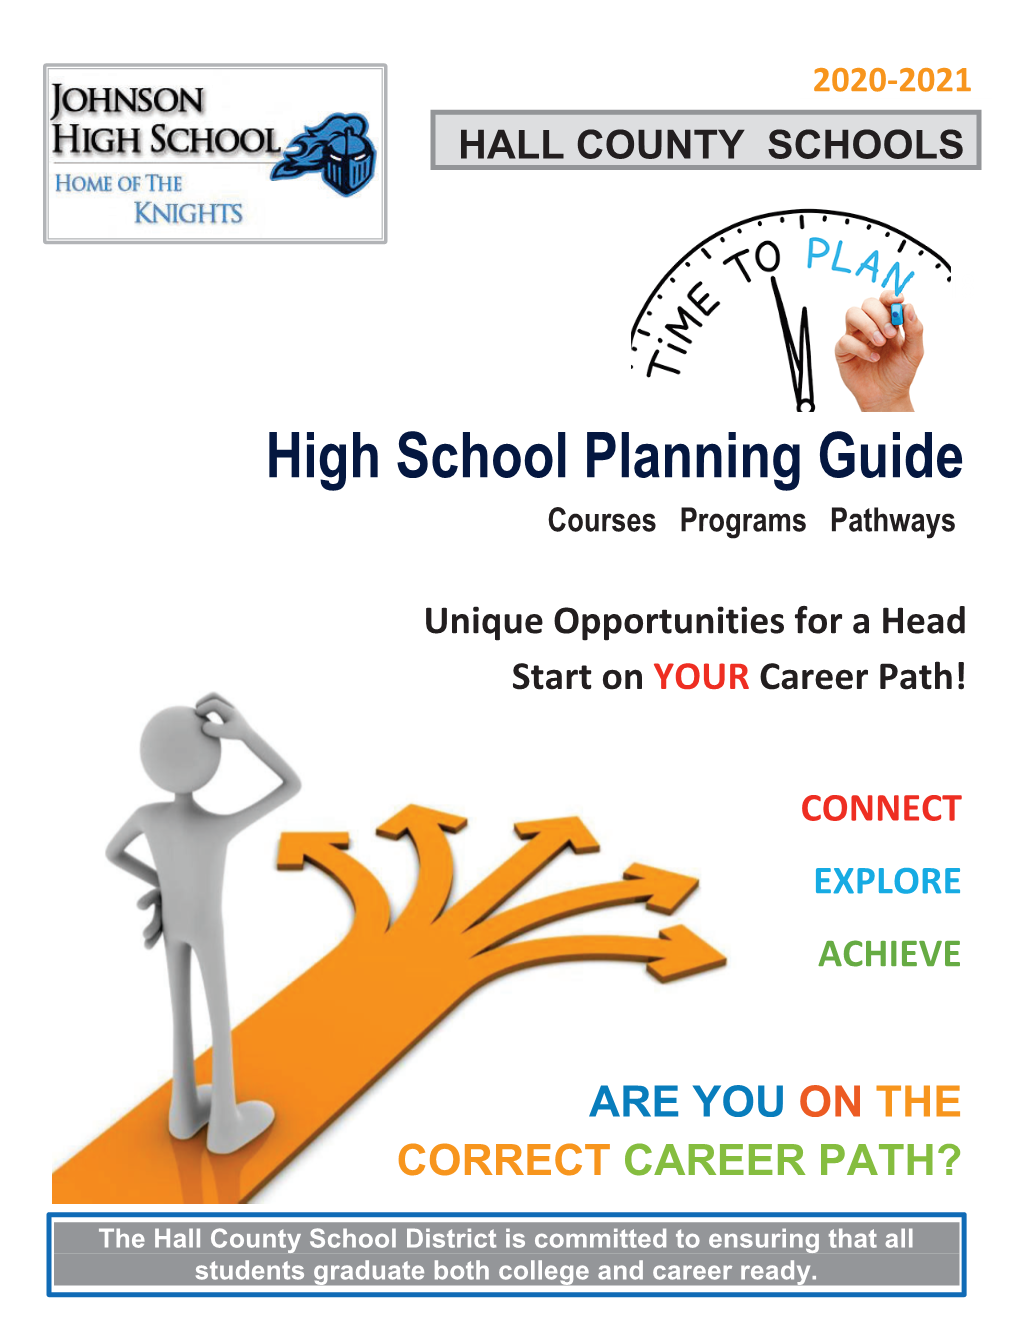 High School Planning Guide Courses Programs Pathways